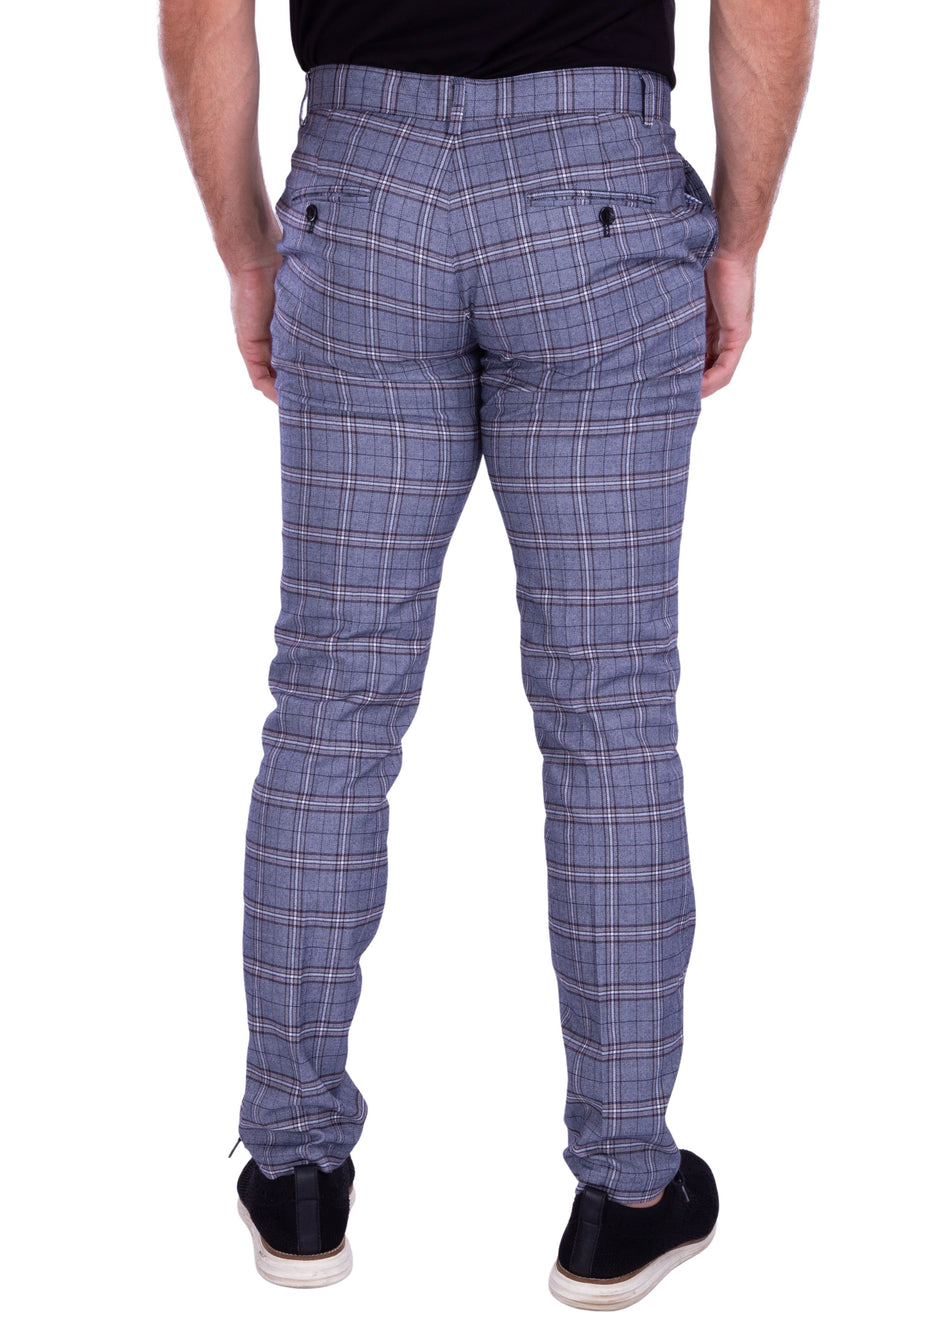 What To Wear With Plaid Pants? - 30 Men's Plaid Pants Outfit Ideas